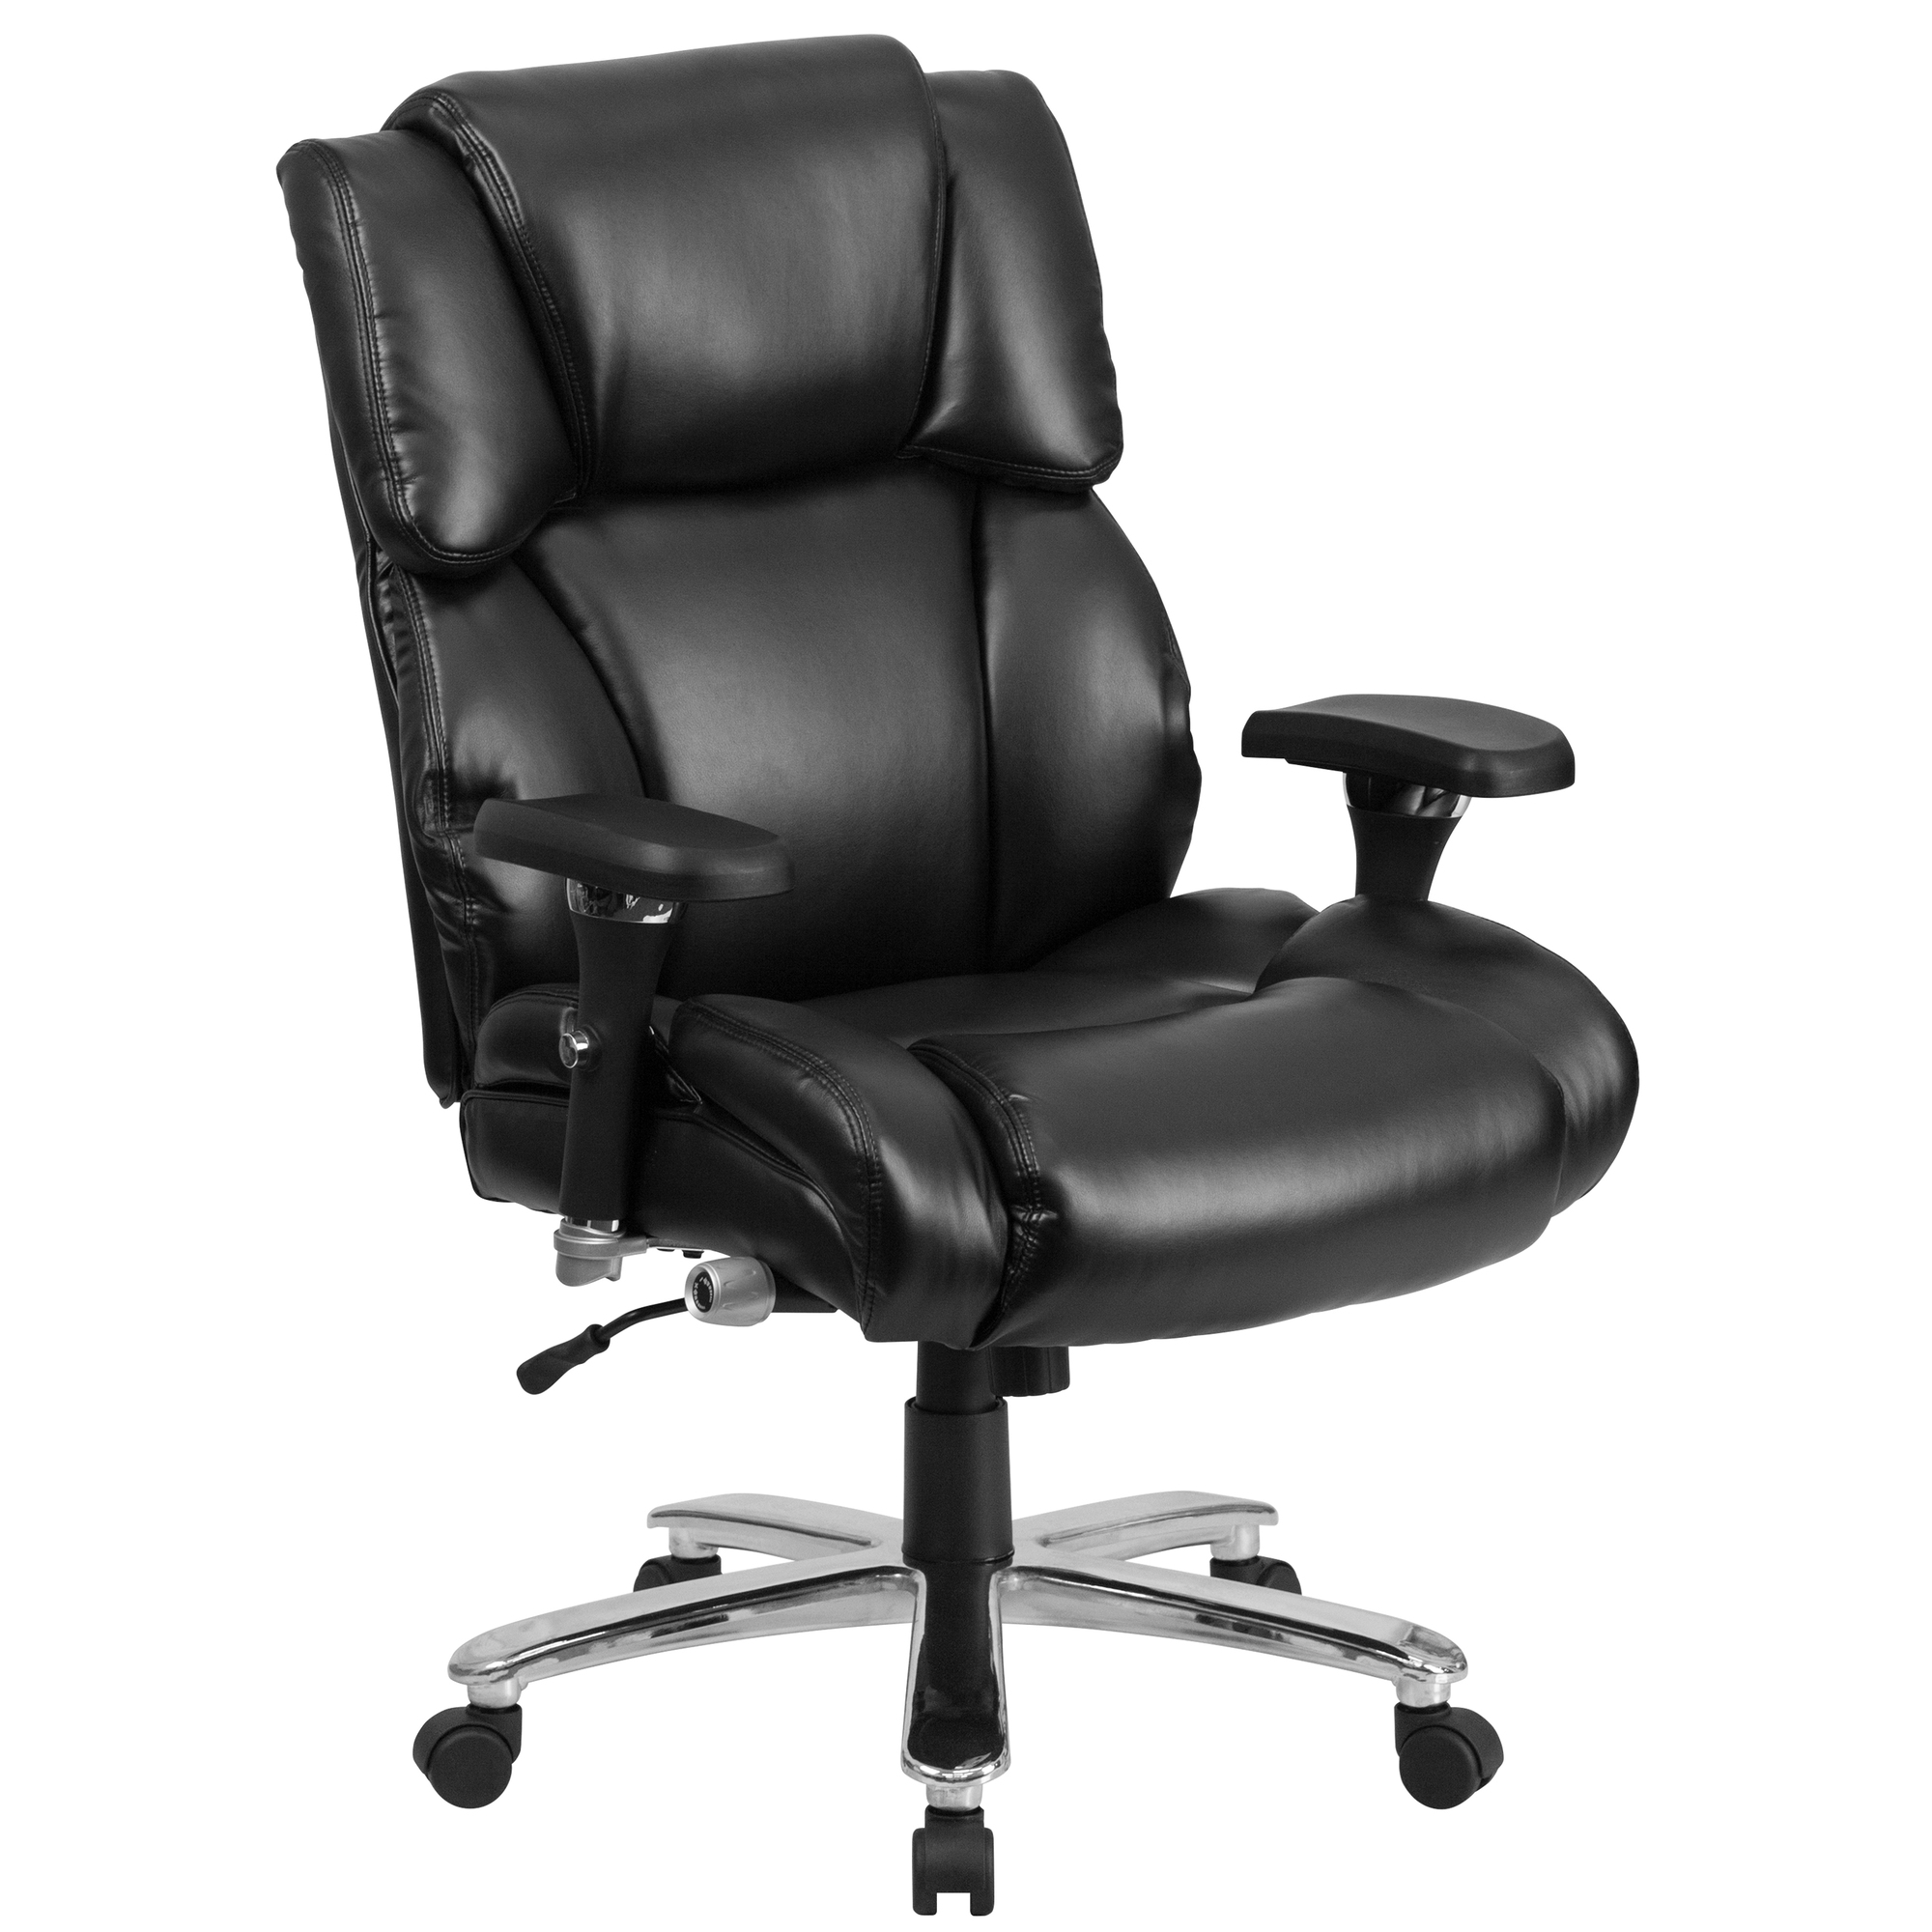 Flash Furniture, 400 lb. Rated High Back Black LeatherSoft Chair, Primary Color Black, Included (qty.) 1, Model GO2149LEA